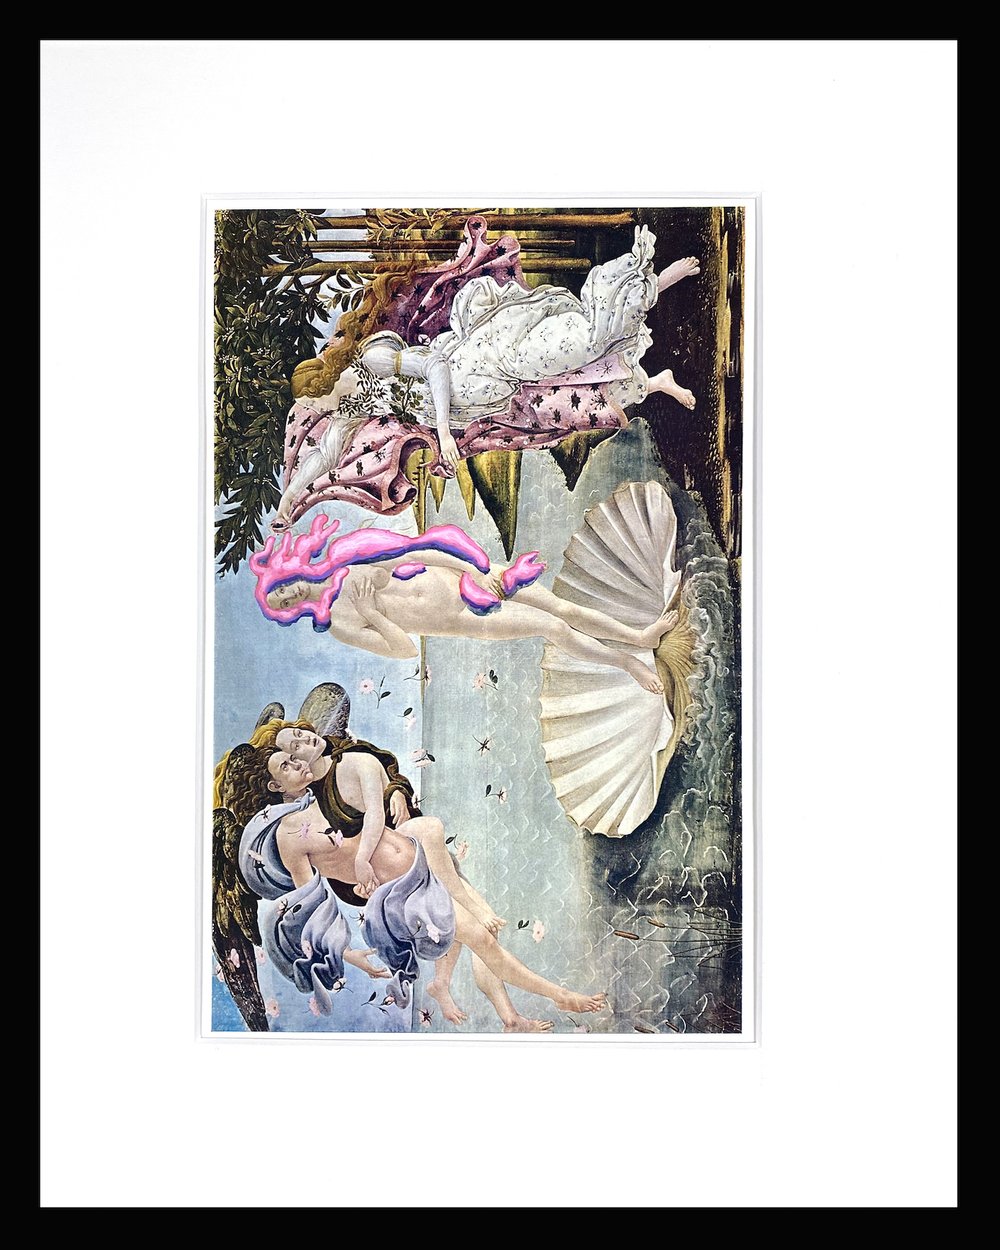    Bubble Gum on Botticelli “The Birth of Venus” (colorplate 37) – Part 3: Chapter 2. The Early Renaissance in Italy ,  acrylic, watercolor, ink on textbook paper, framed: 15” x 12” 